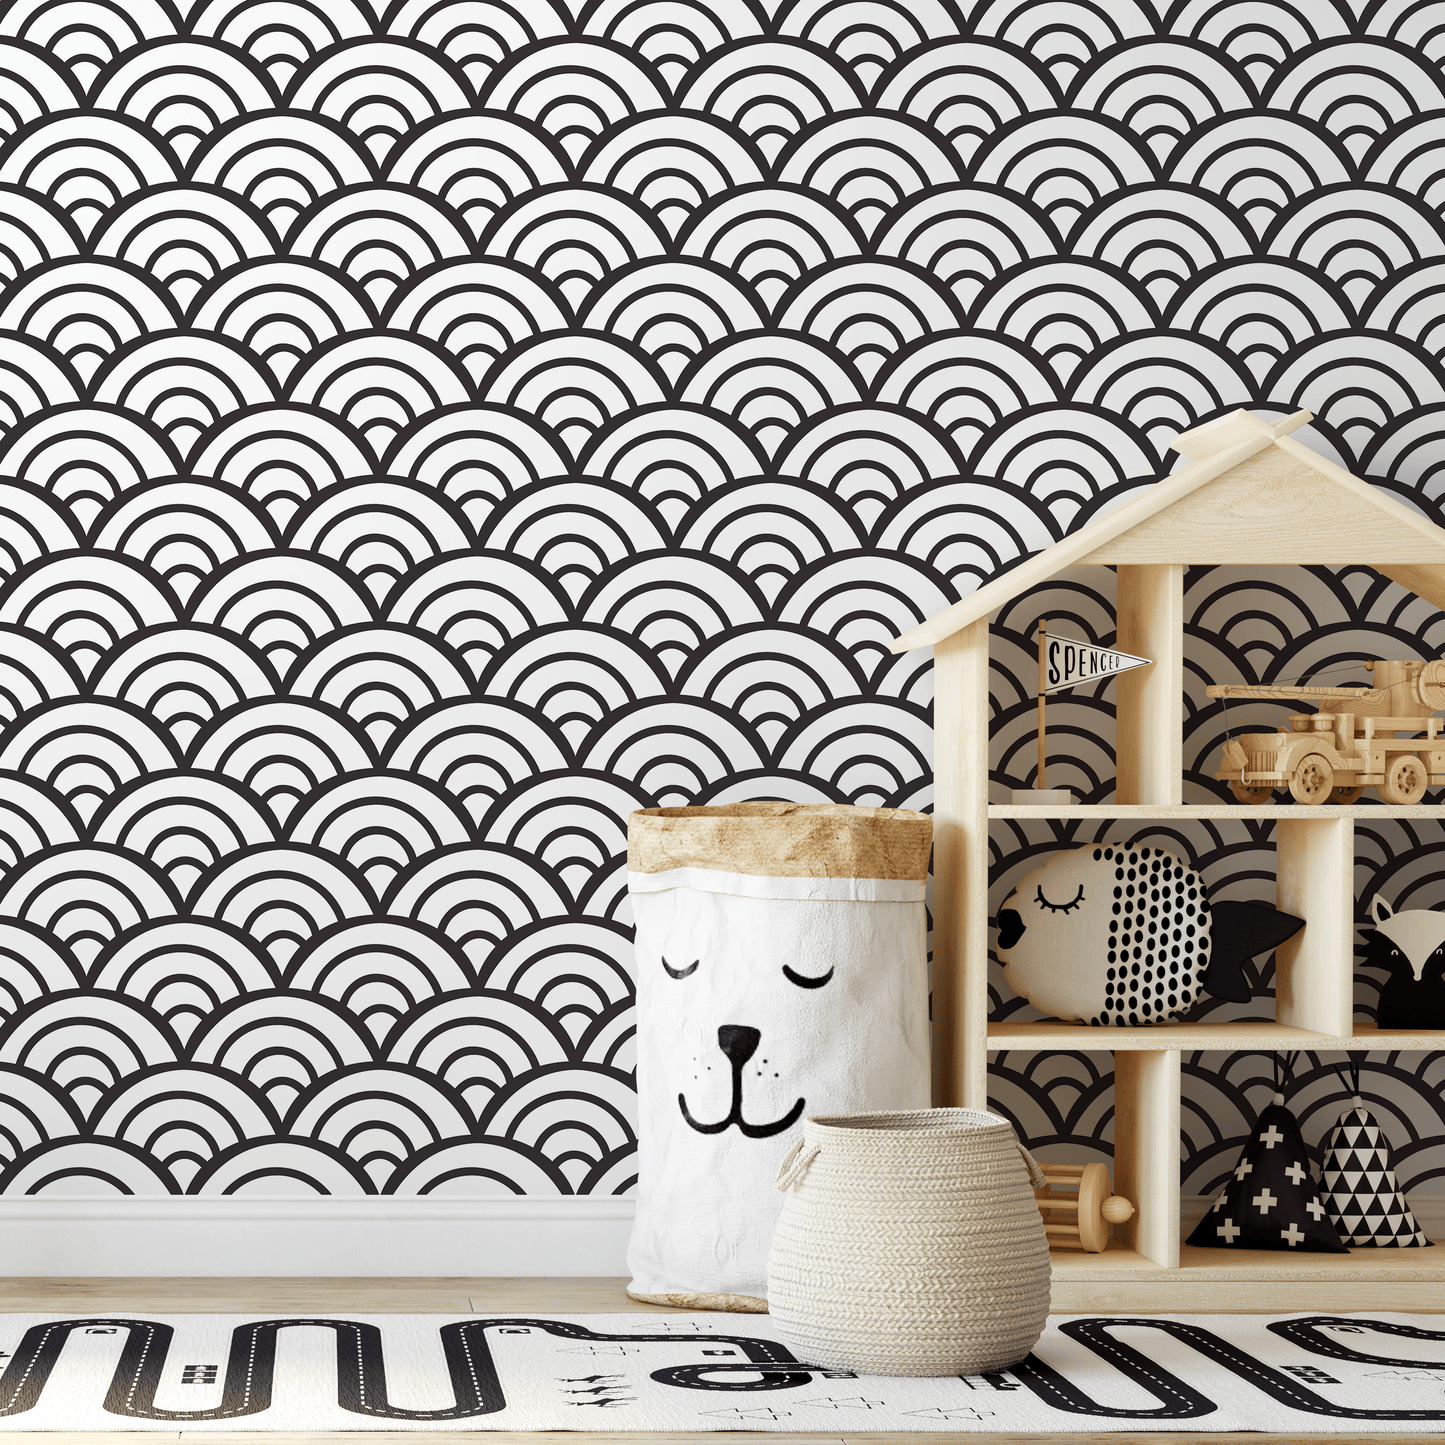 Black and White Wallpaper Boho Scollops Wallpaper Peel and Stick and Traditional Wallpaper - A590